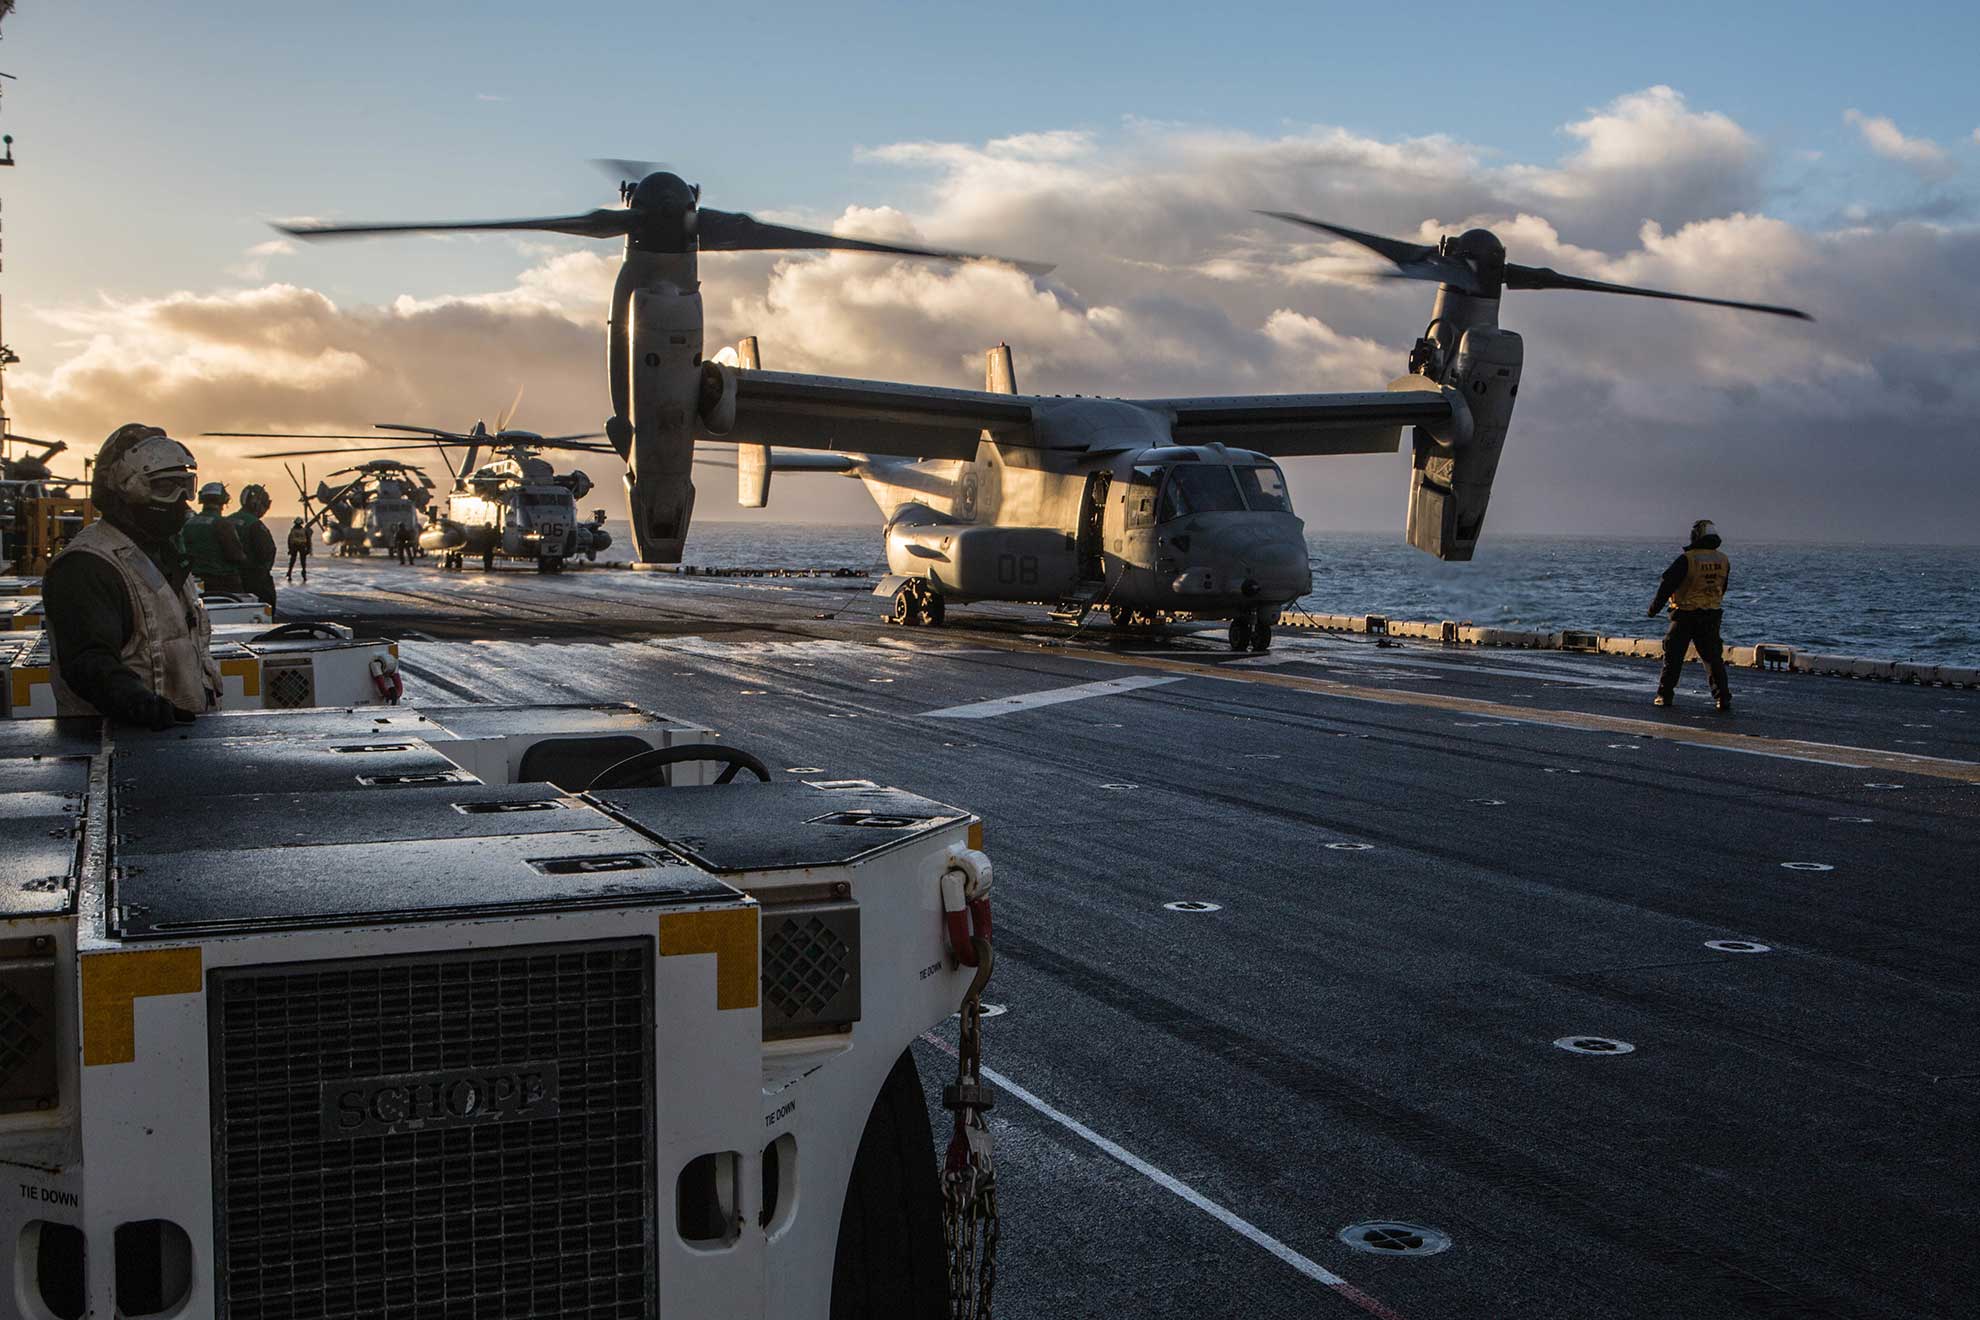 Keflavik, Iceland (Oct. 17, 2018) A U.S. Marine Corps V-22 Osprey and a CH-53 Sea Stallion helicopter prepare for takeoff aboard amphibious assault ship USS Iwo Jima (LHD 7), Oct 17, 2018 in preparation for exercise Trident Juncture 2018. Trident Juncture is a planned exercise to enhance U.S. and NATO partners' and Allies' ability to work together collectively and conduct military operations under challenging conditions -- U.S. Marine Corps photo by Lance Cpl. Brennon A. Taylor. -